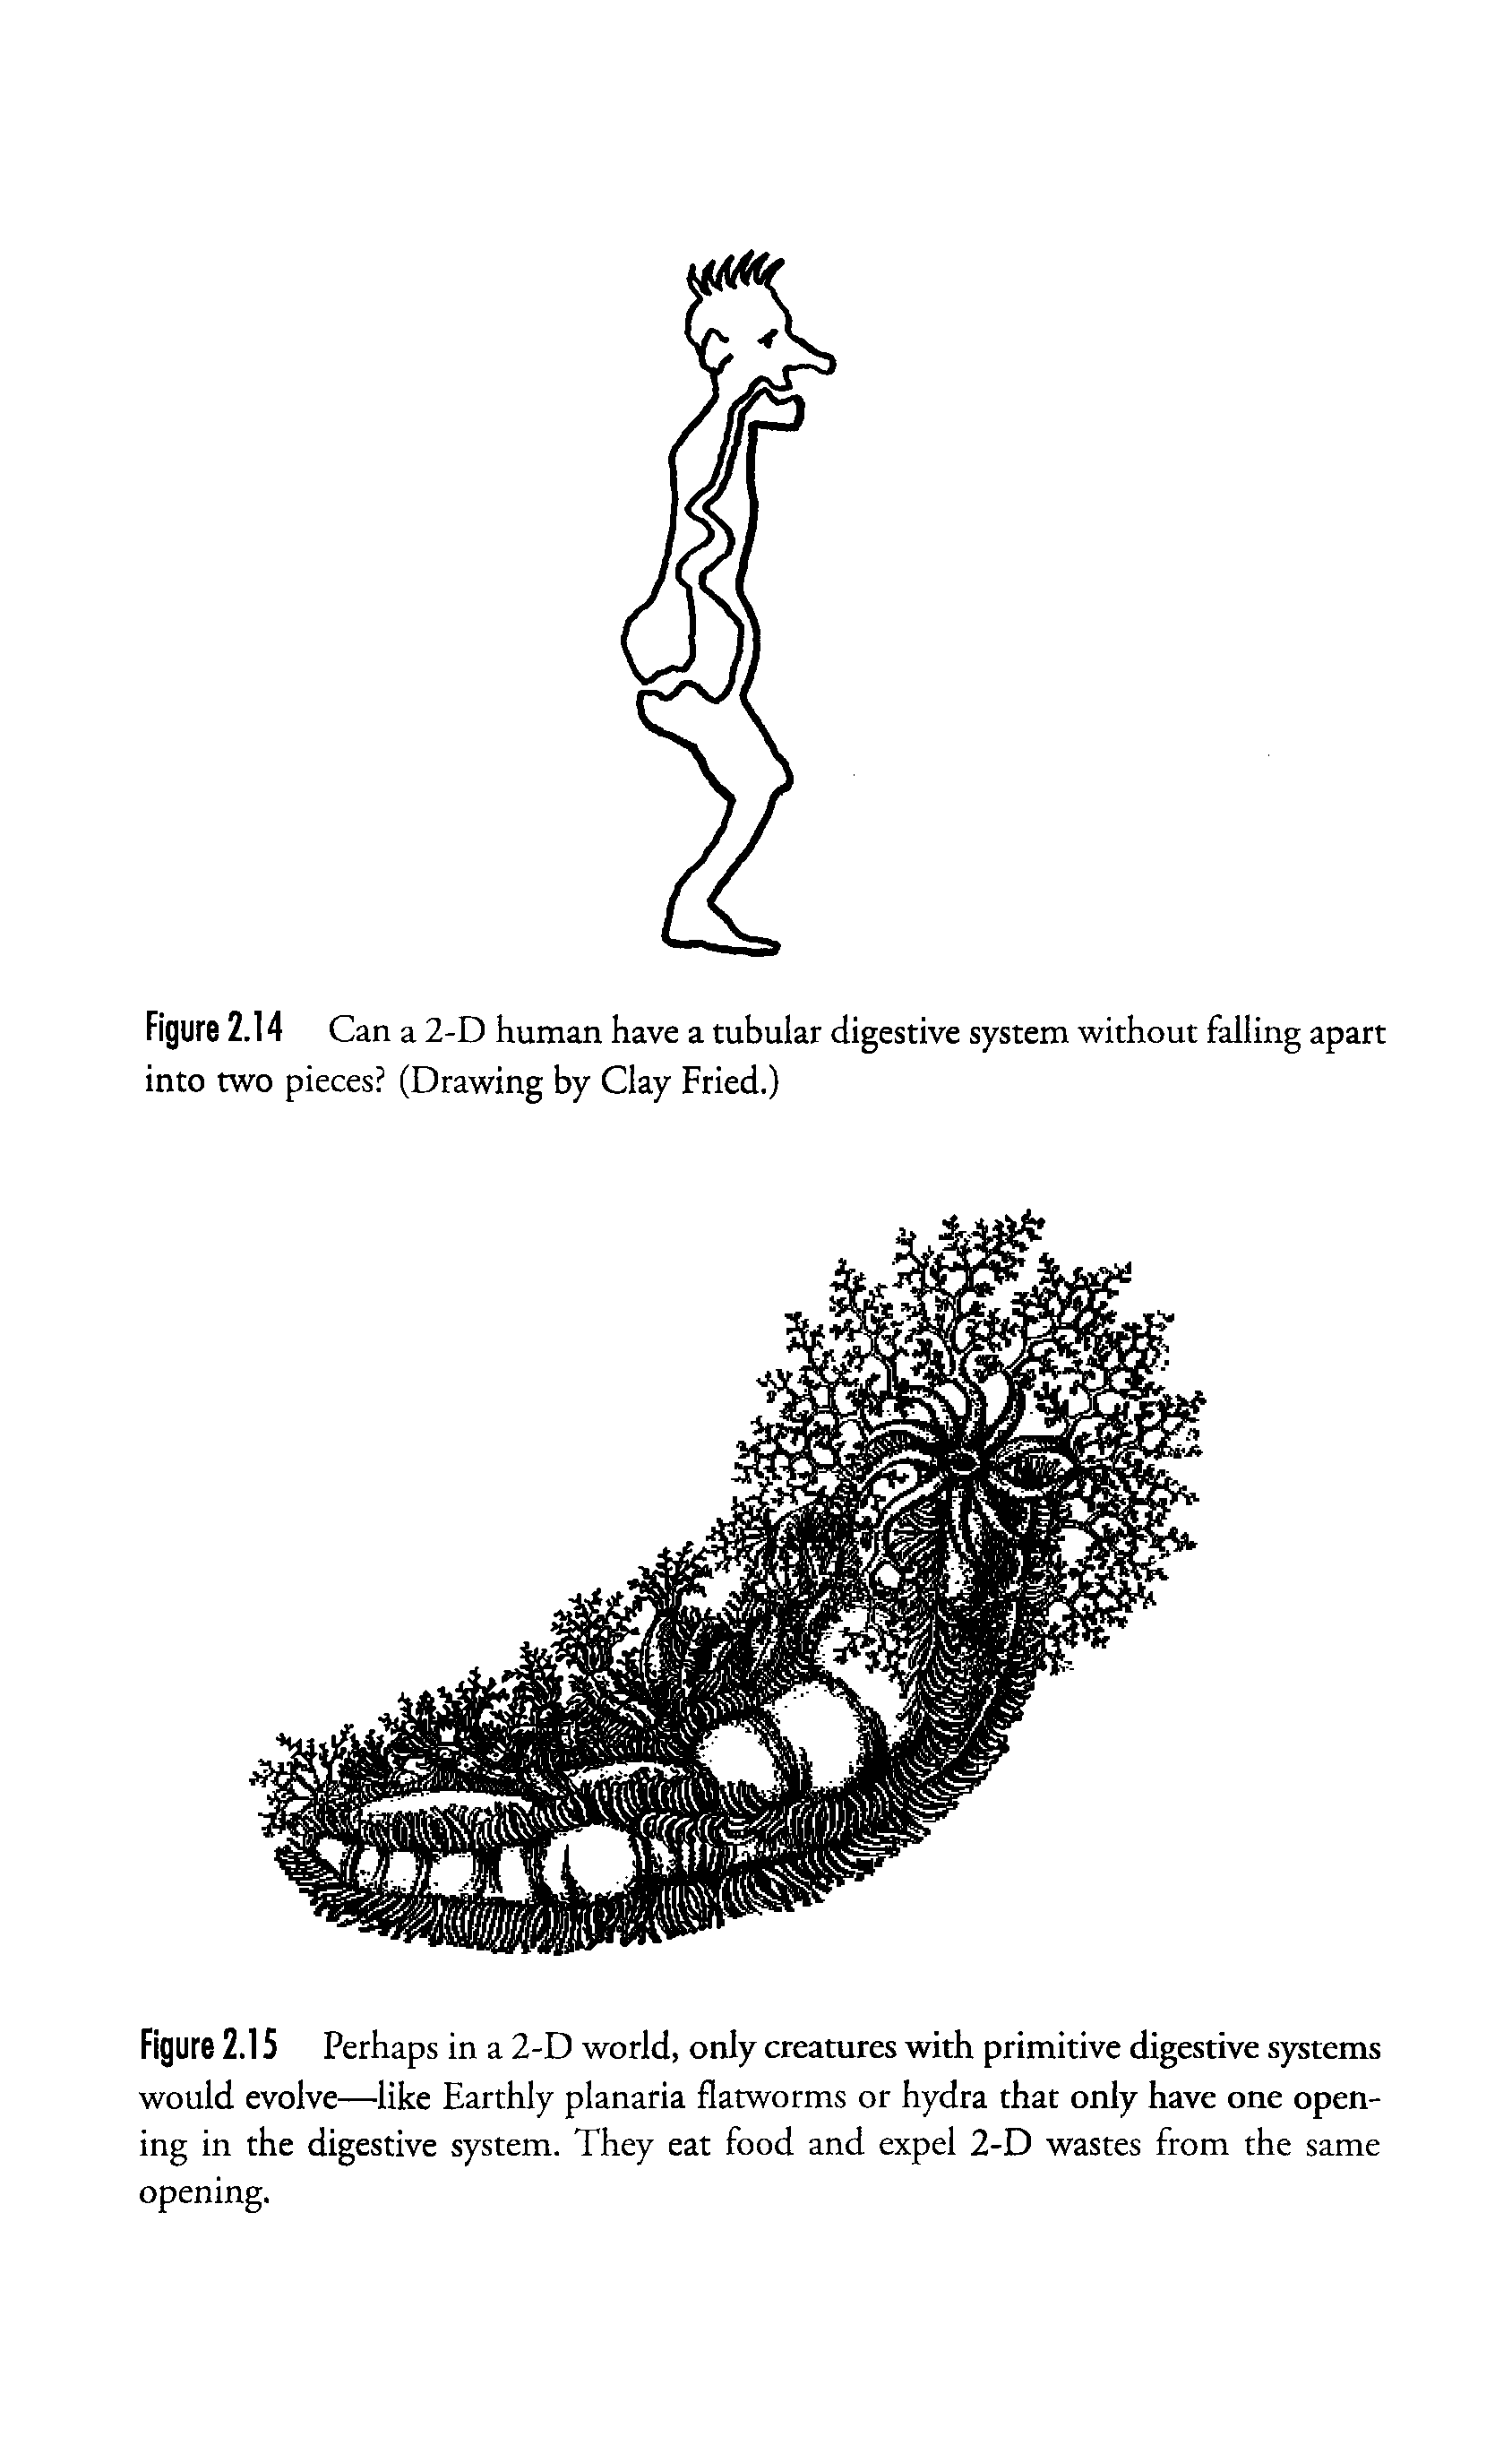 Figure 2.15 Perhaps in a 2-D world, only creatures with primitive digestive systems would evolve—like Earthly planaria flatworms or hydra that only have one opening in the digestive system. They eat food and expel 2-D wastes from the same opening.